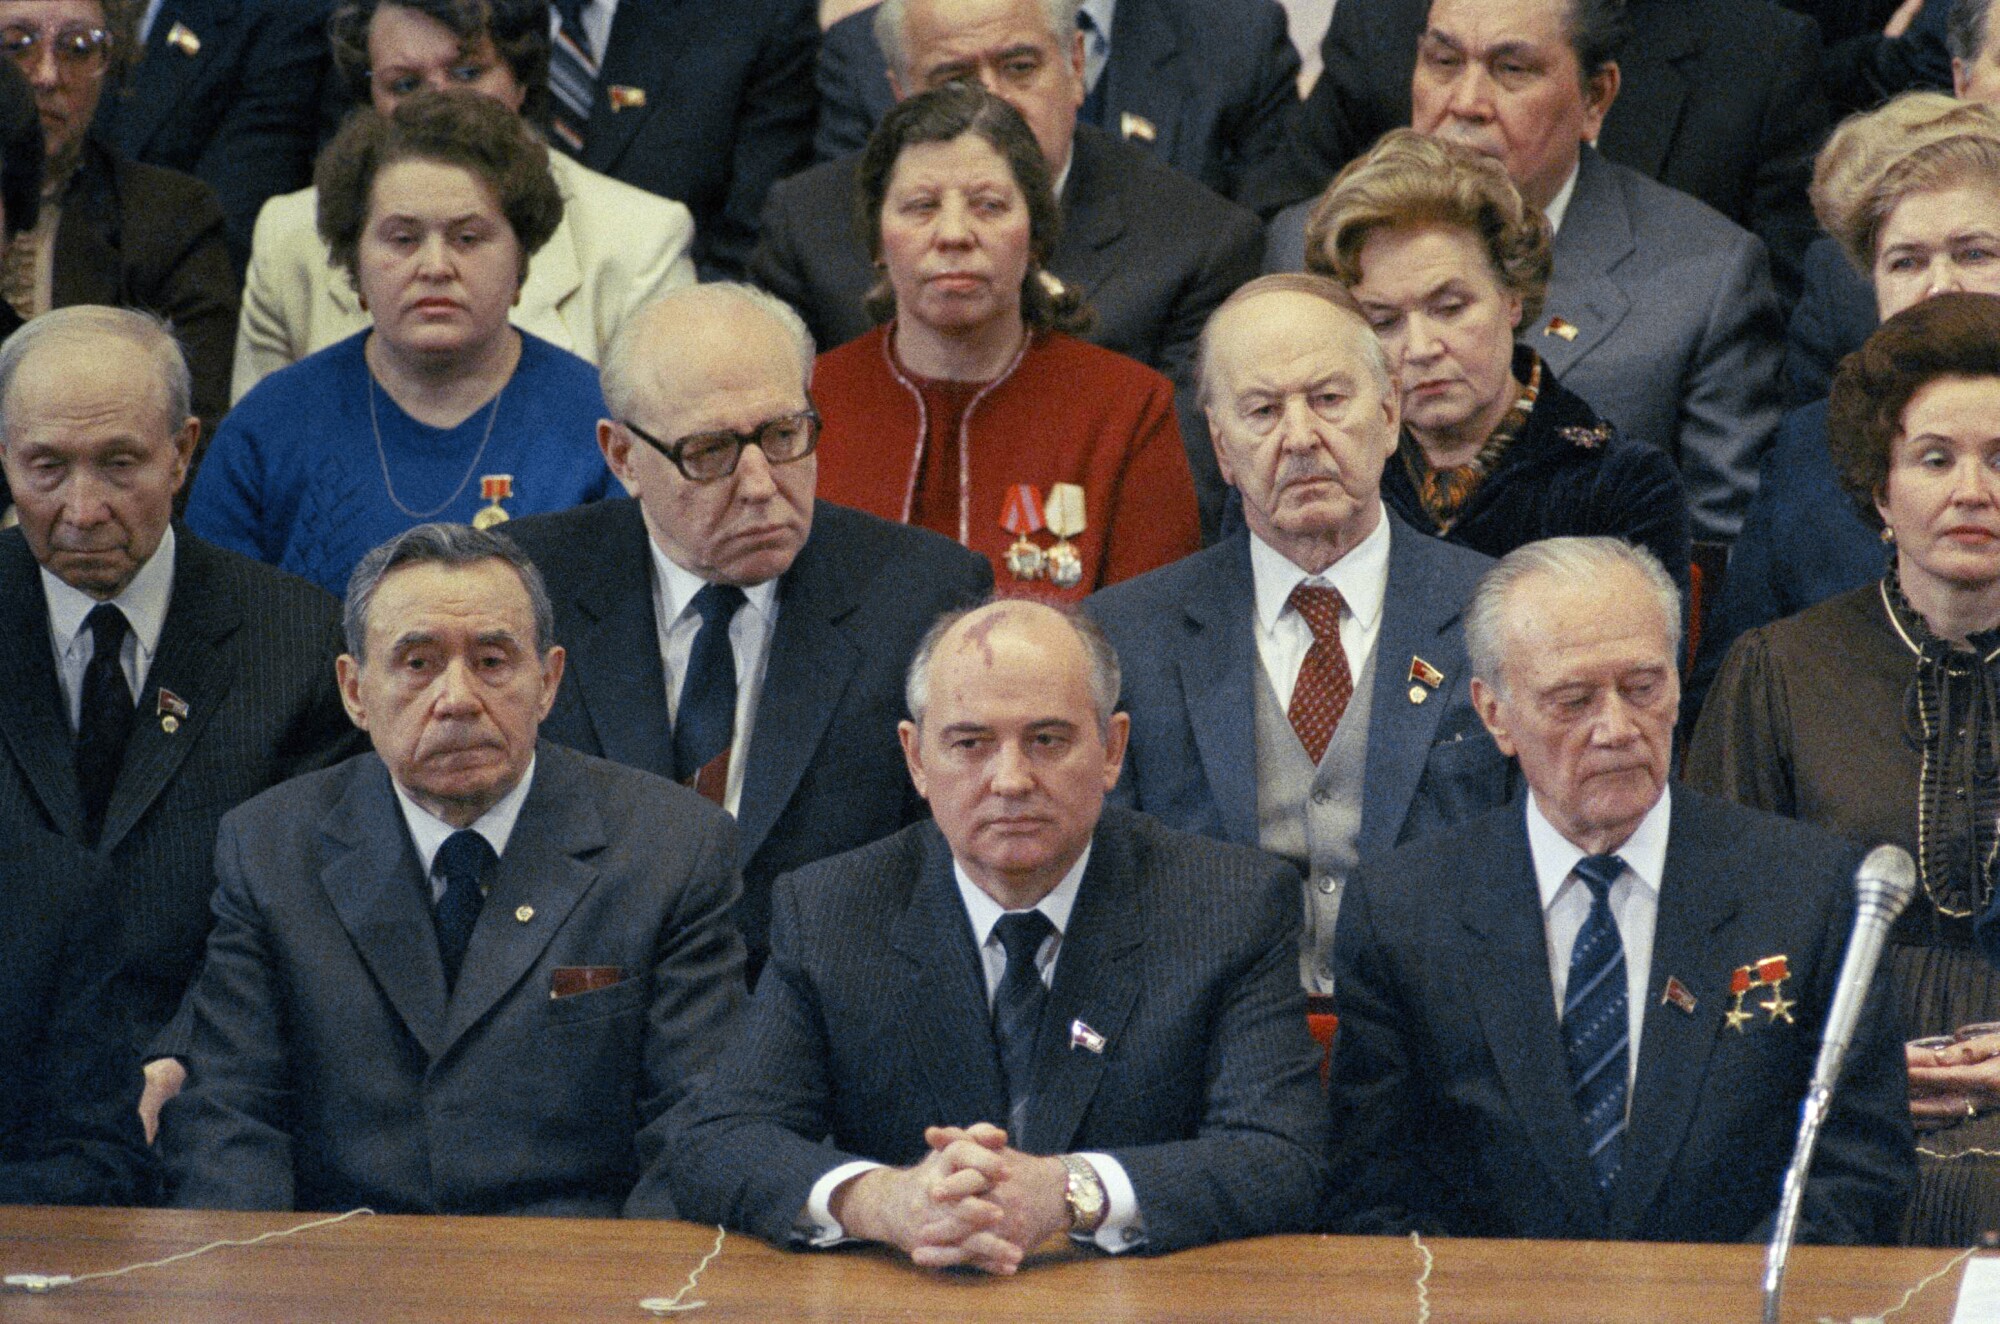 A man in suit and tie, hands clasped while seated, is flanked by other solemn-looking men and women 